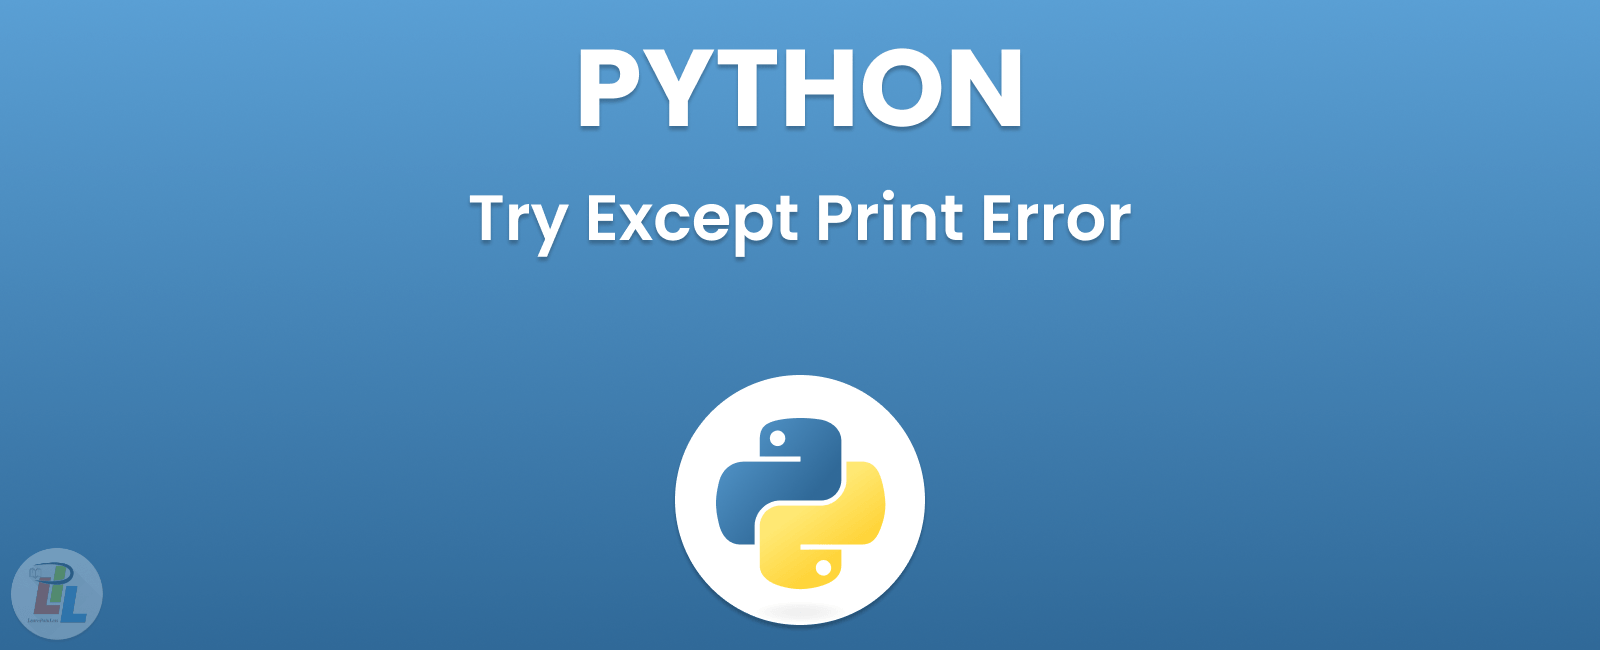 Python Try Except Print Error Made Easy